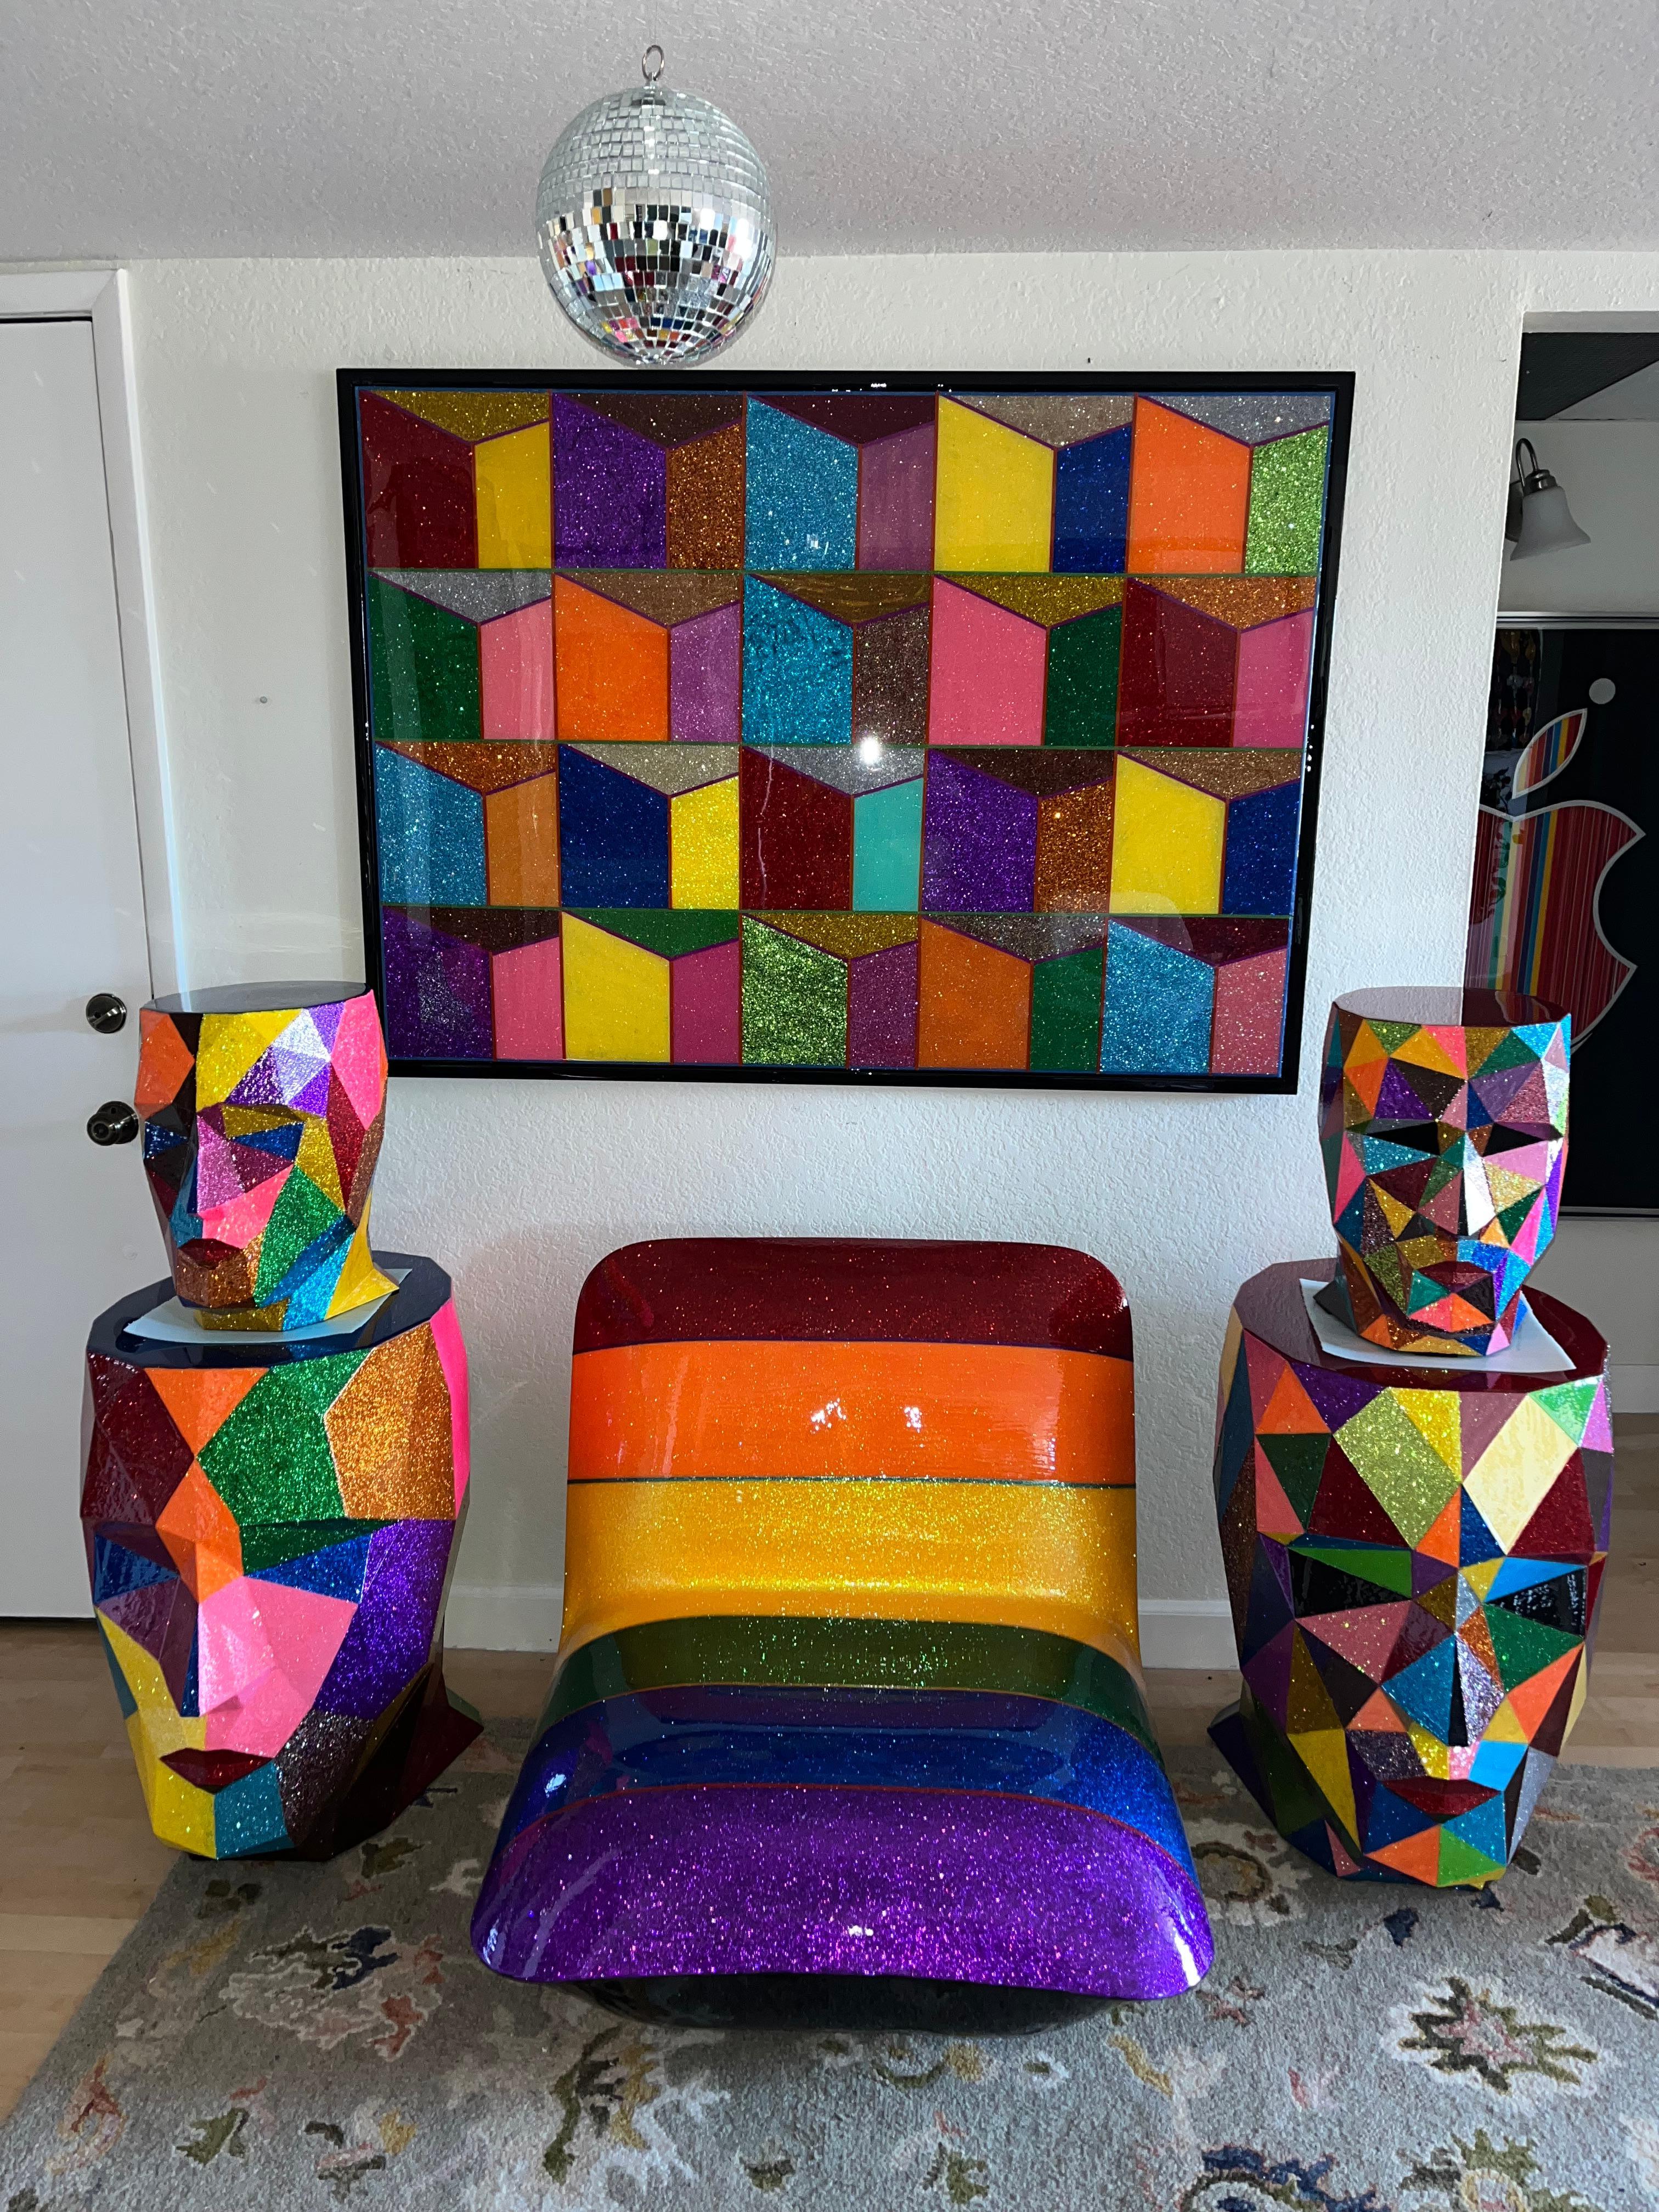 WORLD'S HAPPIEST ROOM (7 Original Pieces - ALL One Of A Kind Art Installation) 12